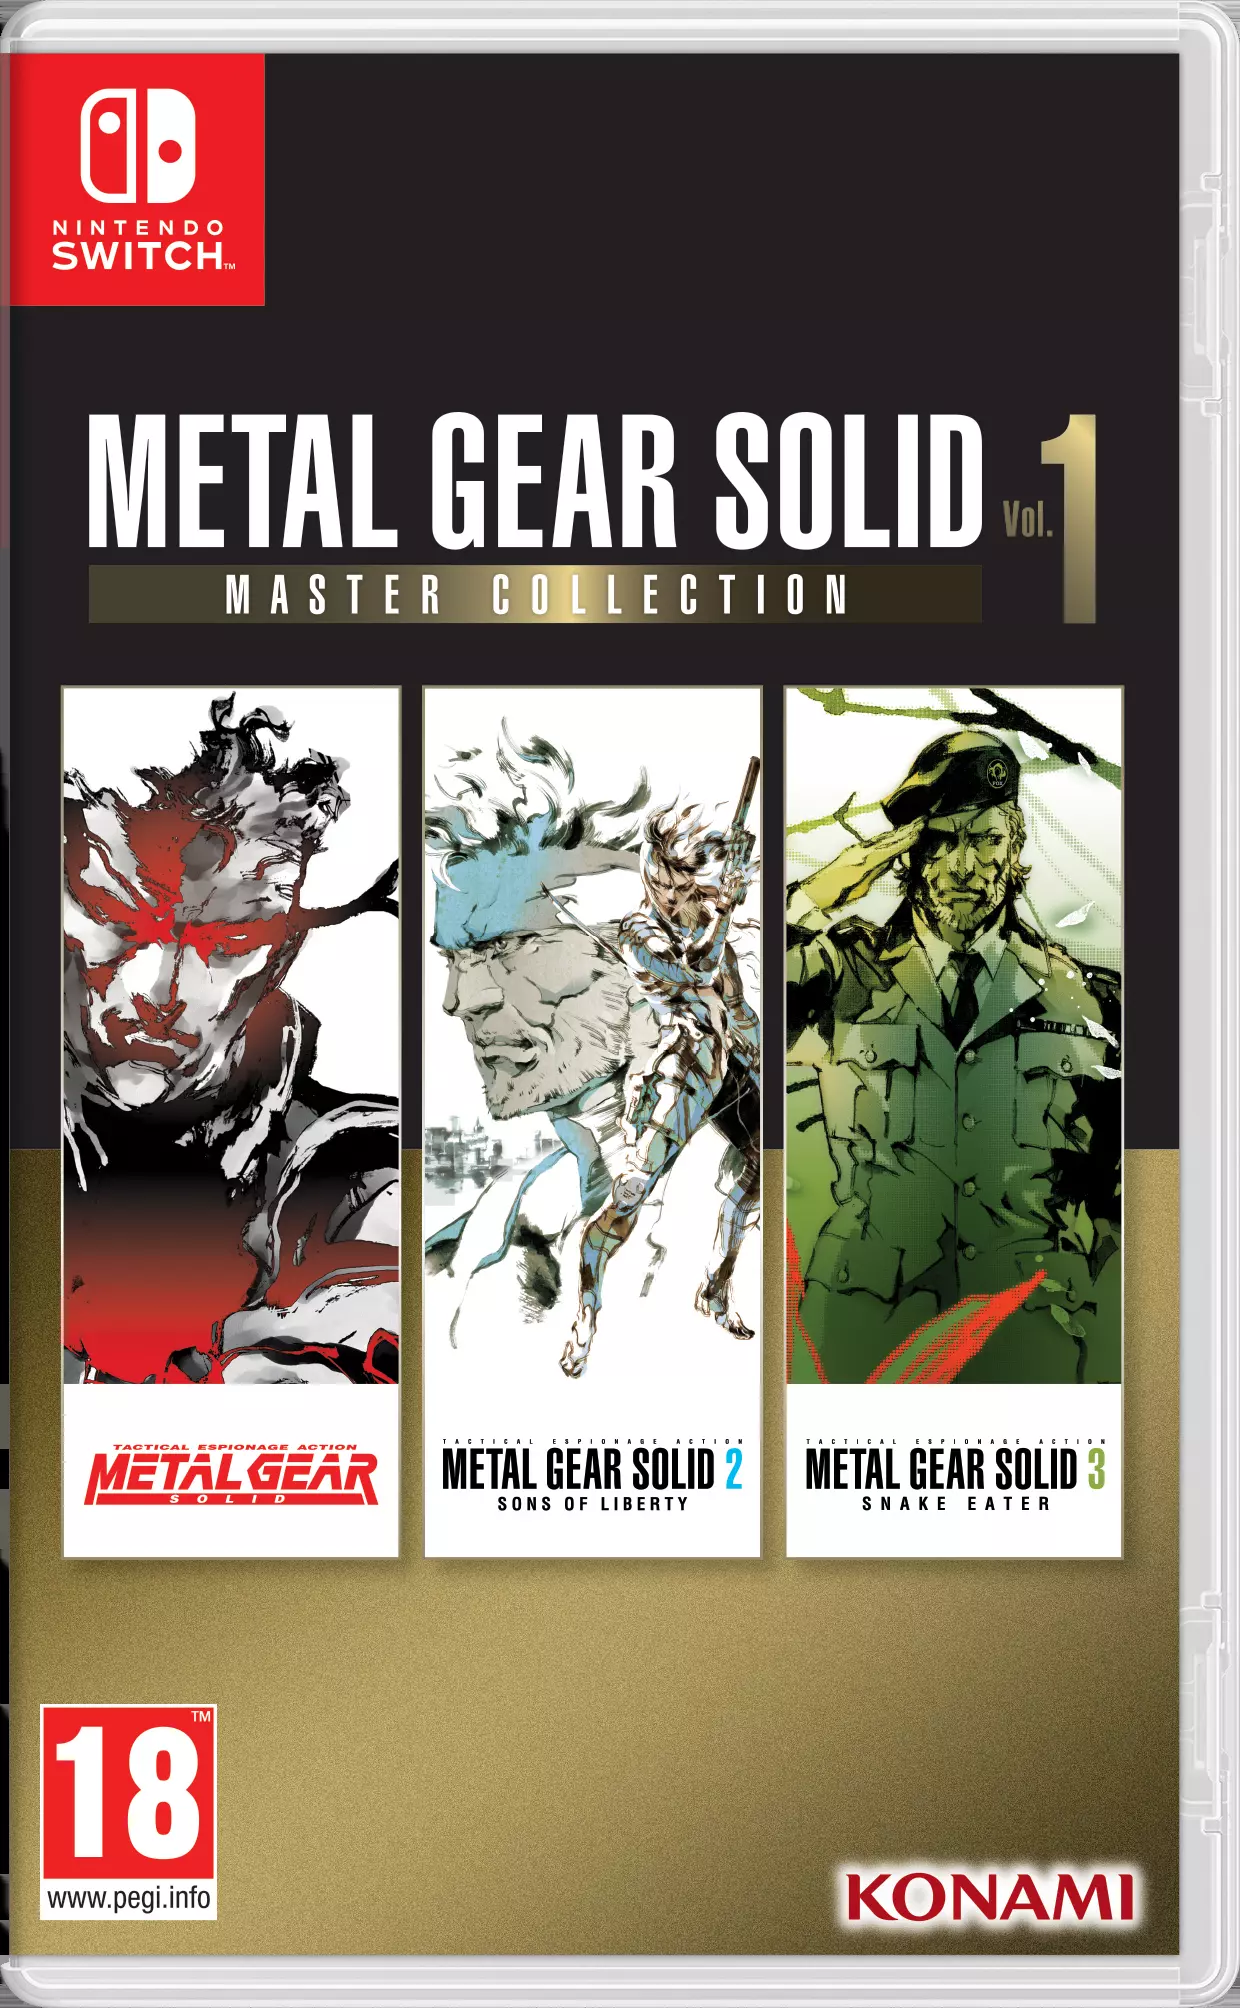 Metal Gear Solid: Master Collection Vol